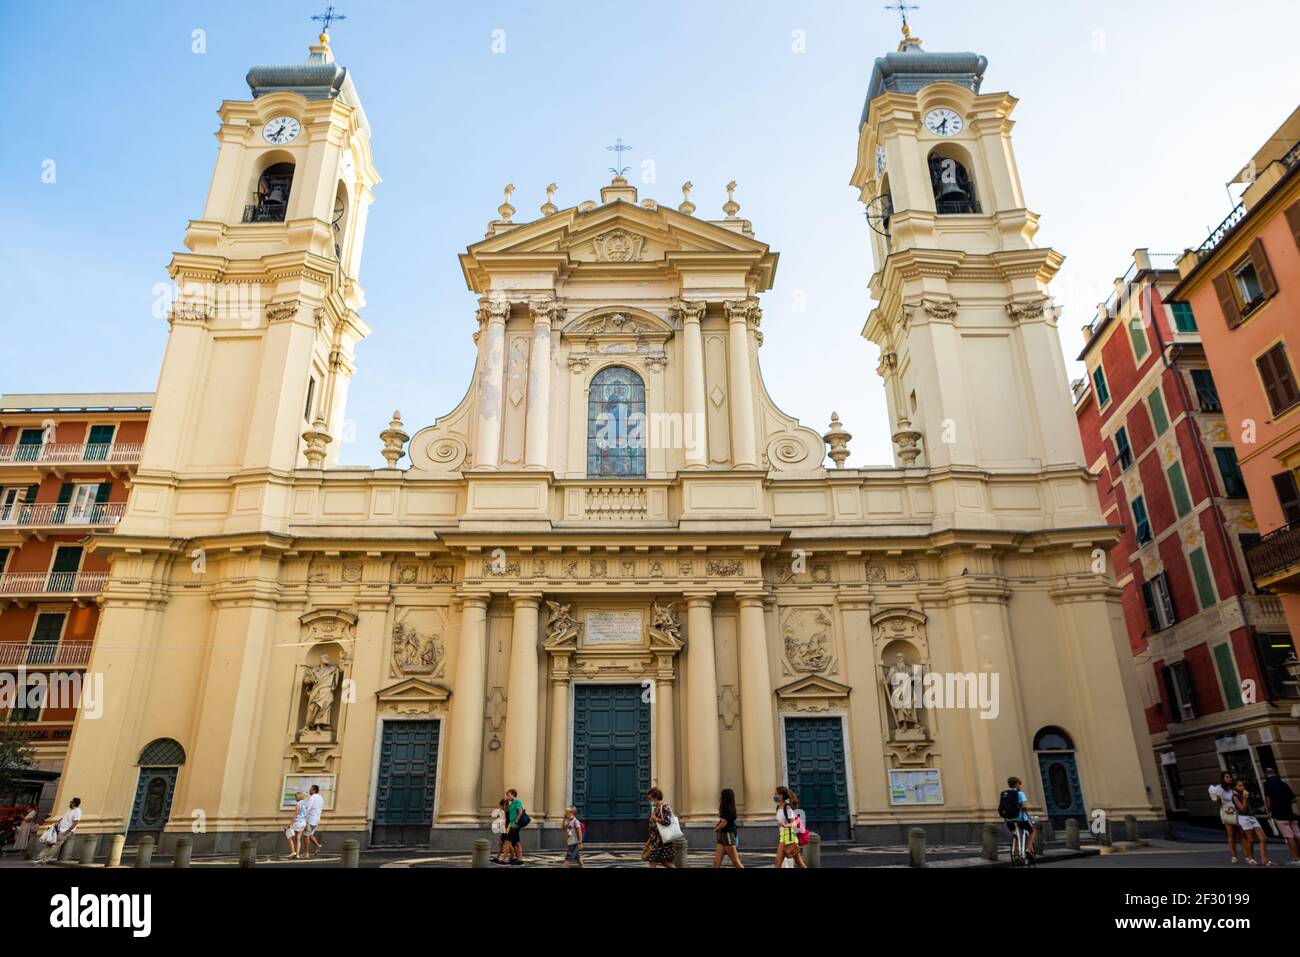 The big Basilica of Santa Margherita in the heart of Santa Margherita Ligure, Italy, with its two characteristic bell towers Stock Photo